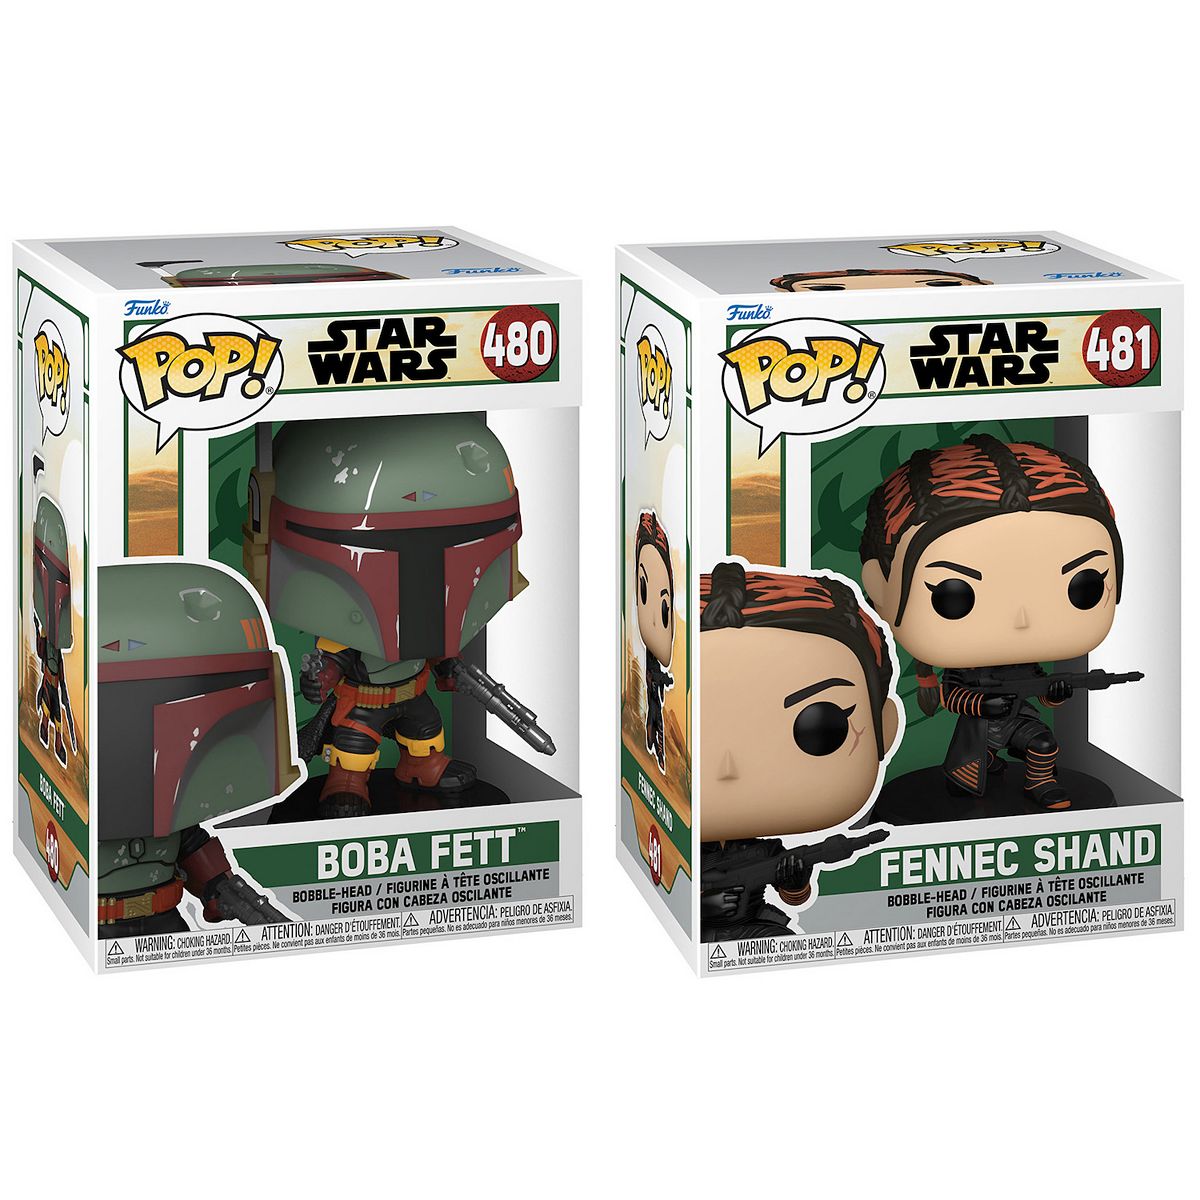 TBOBF Boba Fett and Fennec Shand Bobble Head Toy 2-Pack Set 1